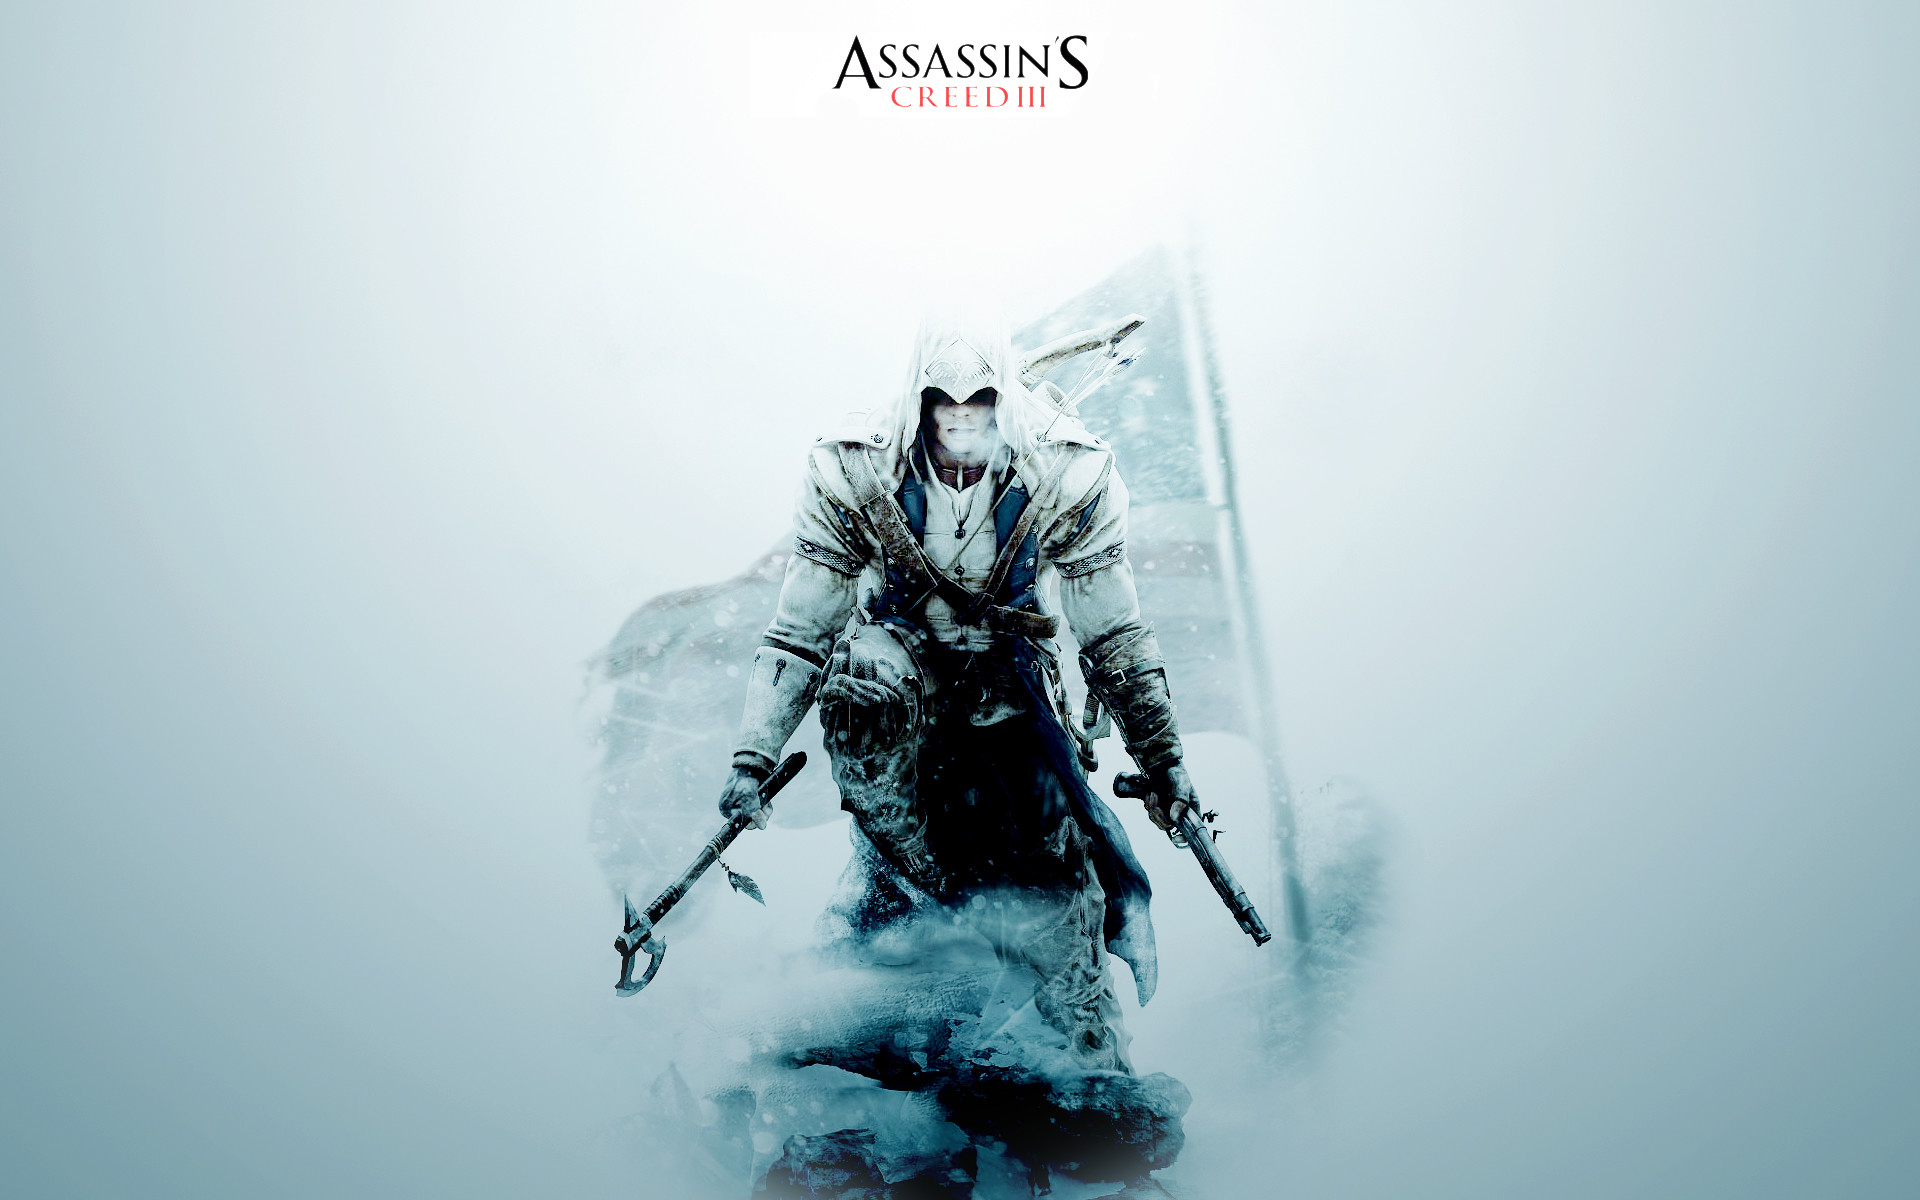 1920x1200 Assassin's Creed III Wallpaper by aquil4 Assassin's Creed III Wallpaper by  aquil4